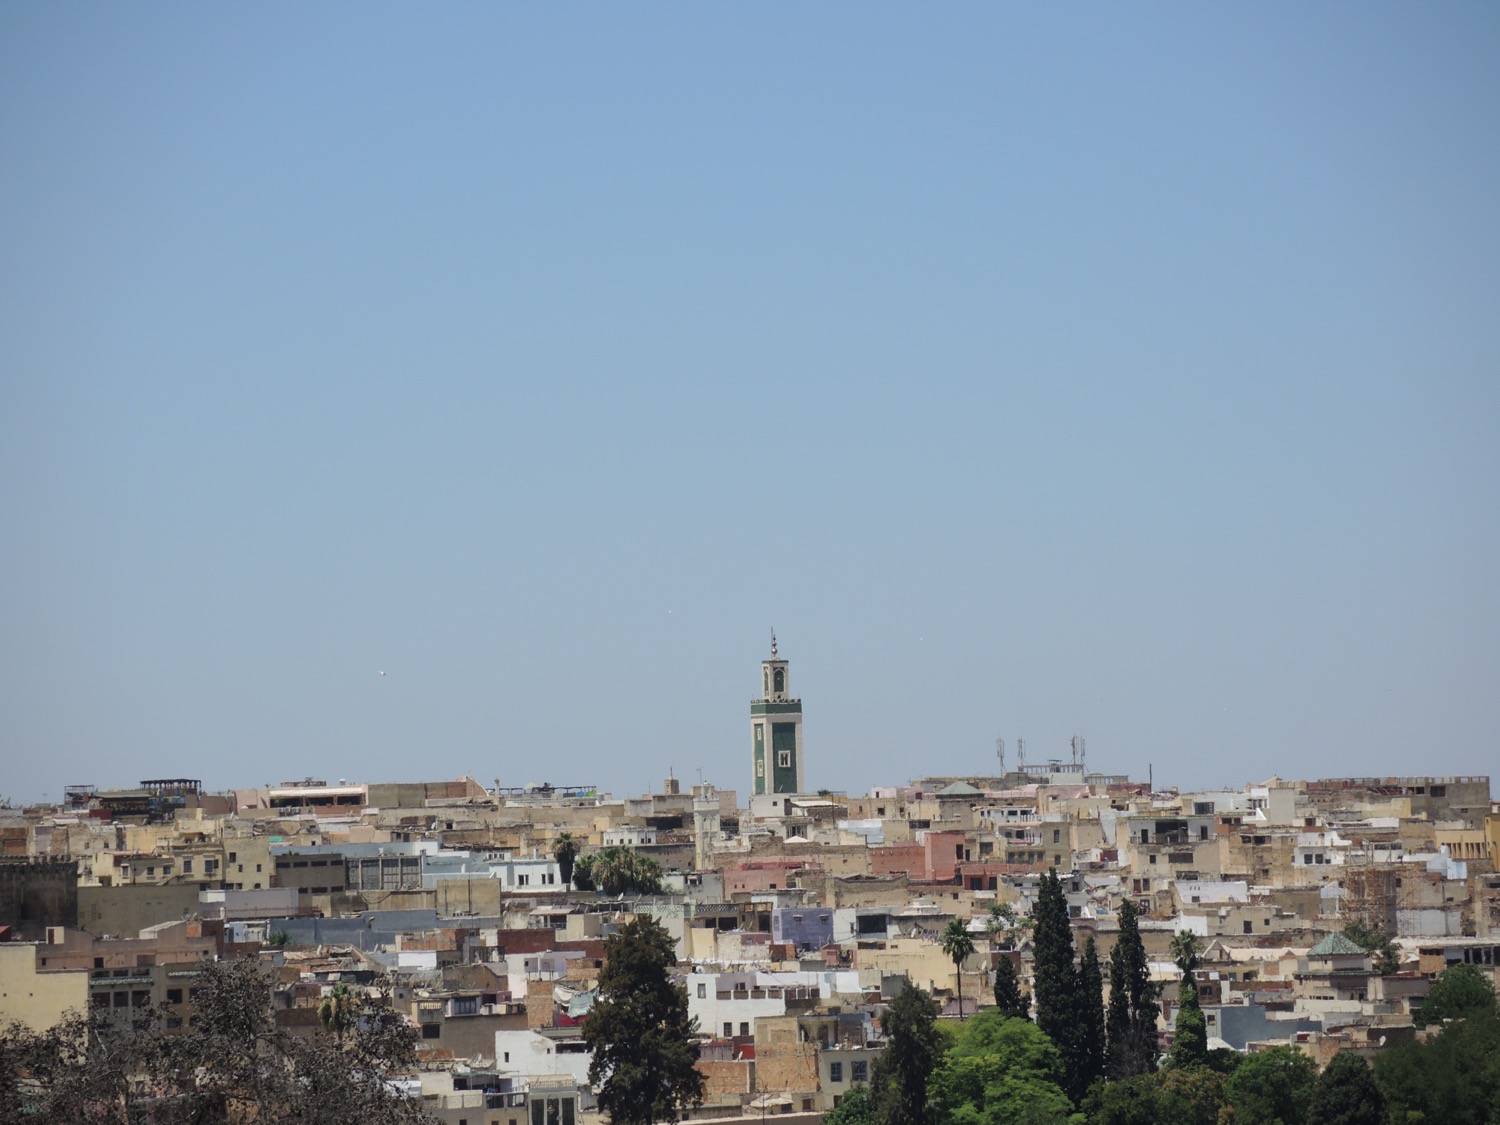 Meknès - Cityscape, view to the east from the center of the Ville Nouvelle